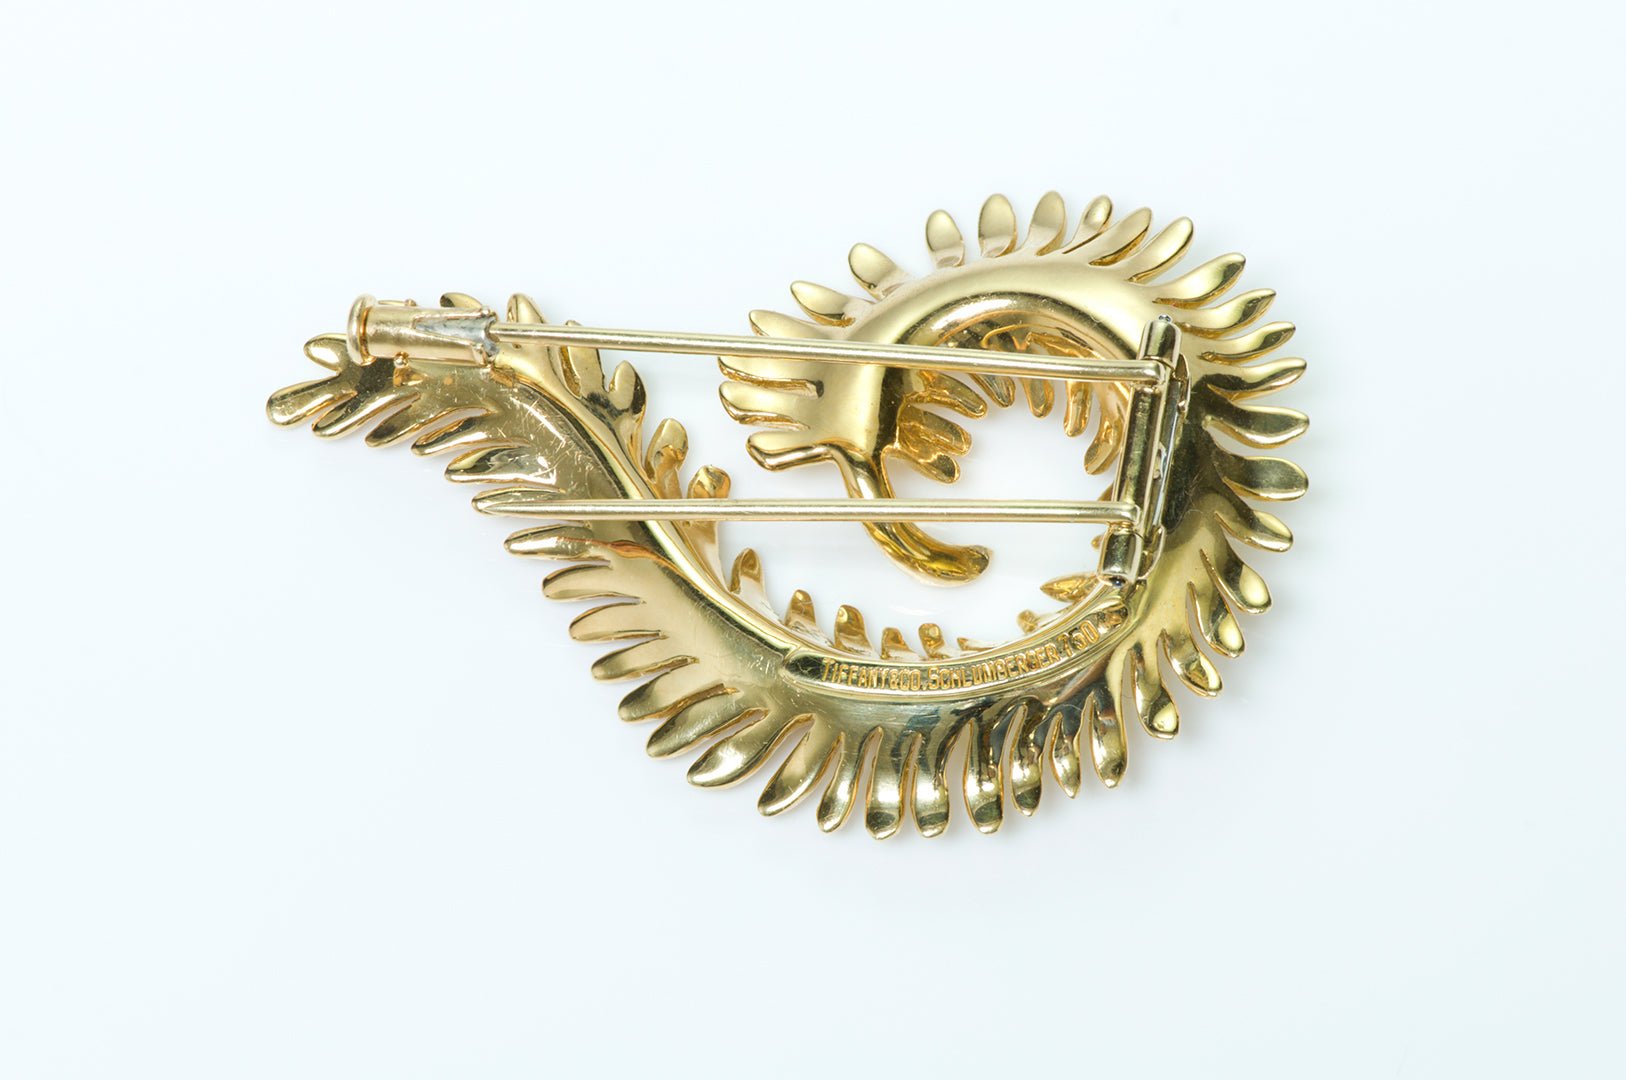 Tiffany & Co. Schlumberger Gold Feather Brooch